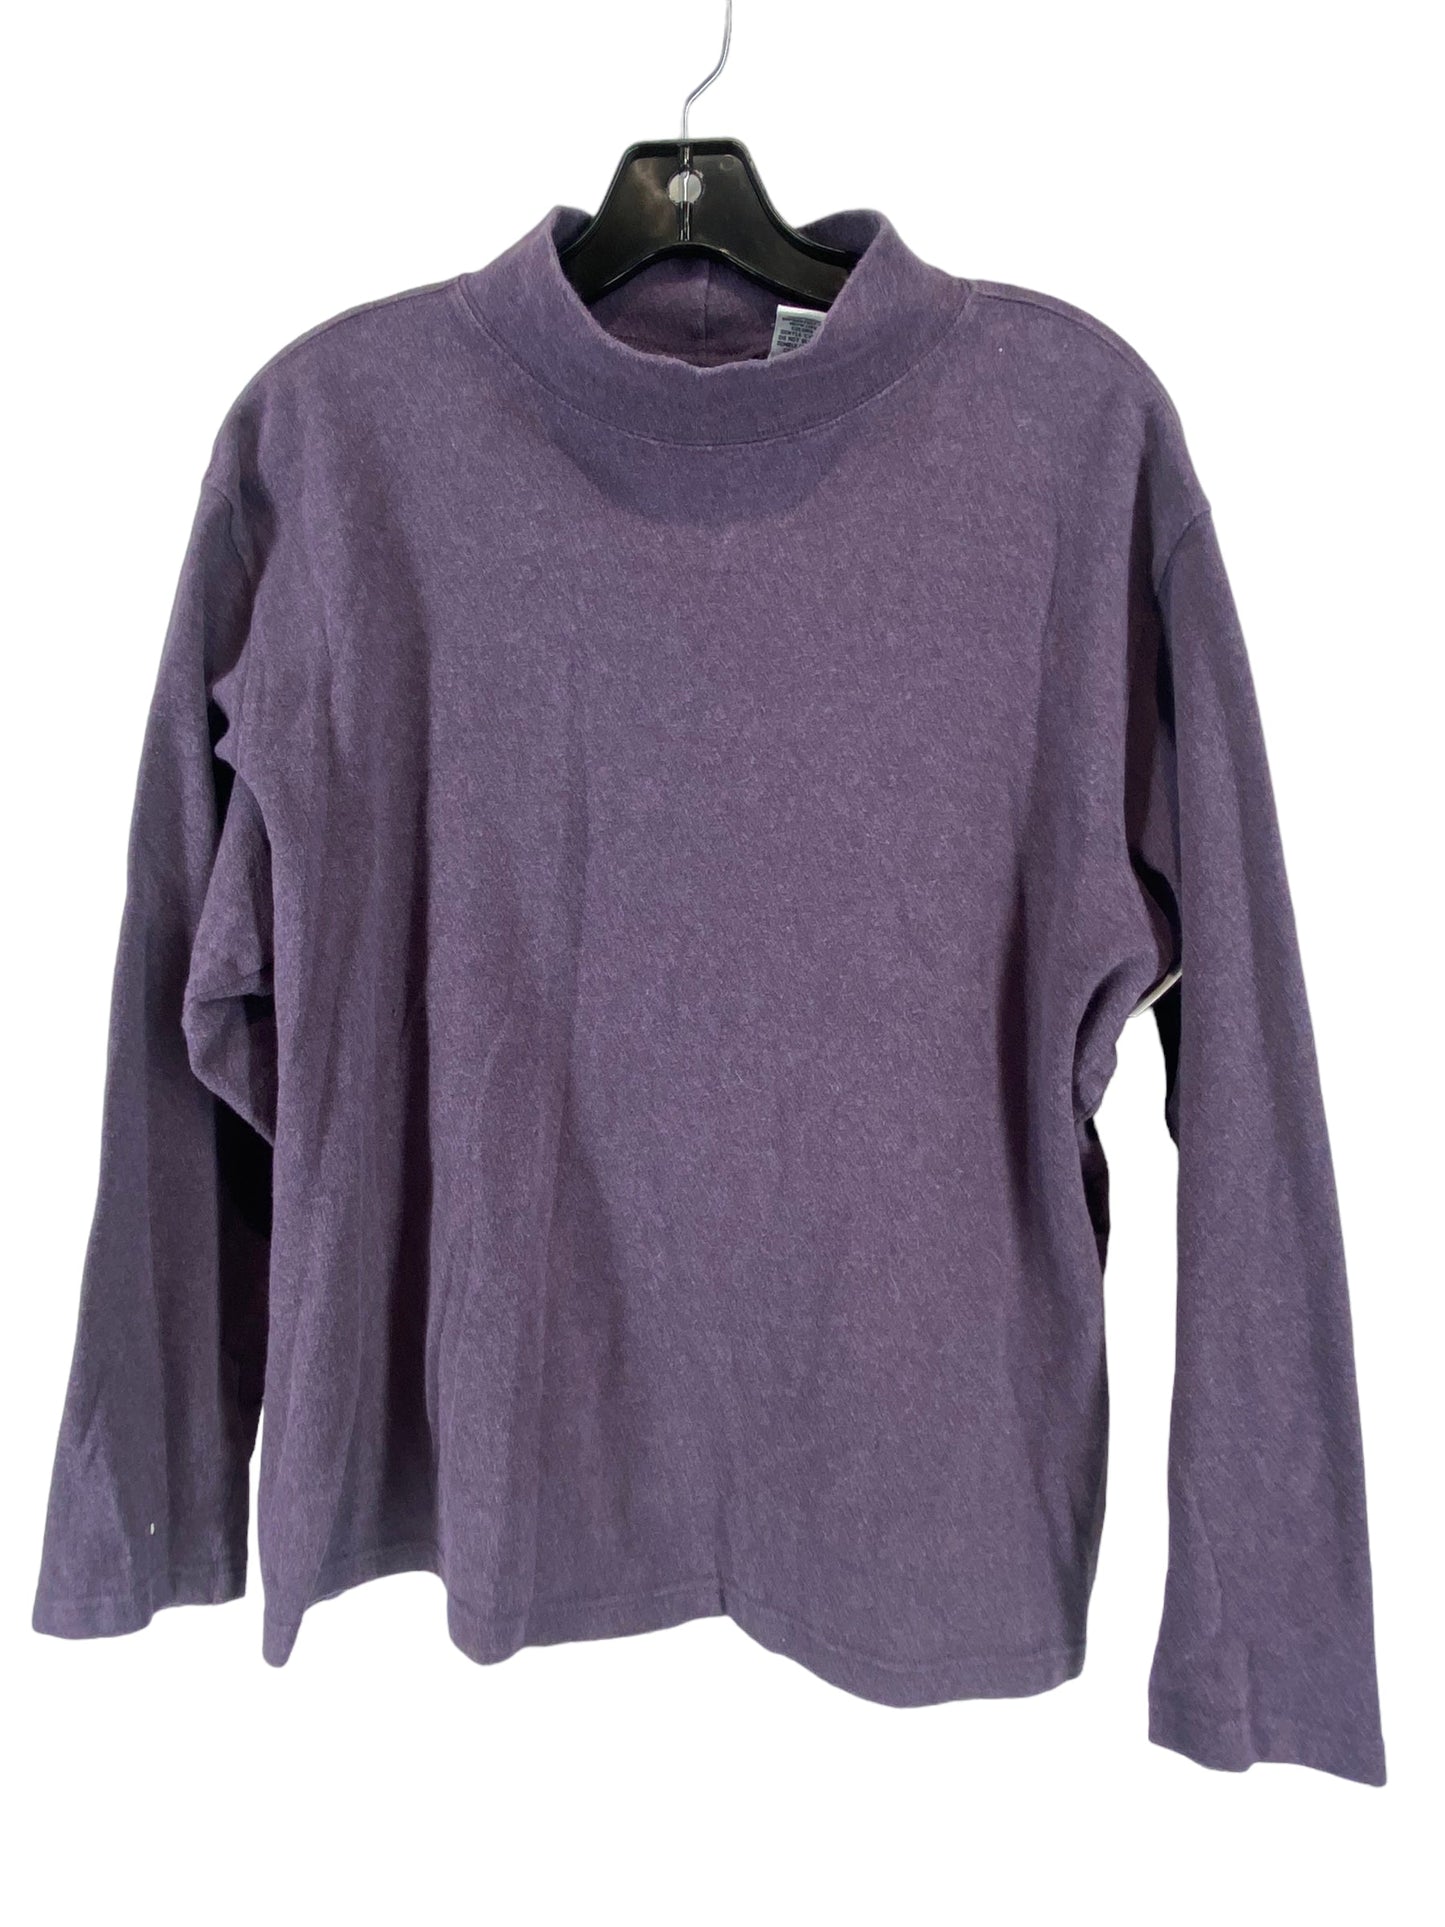 Top Long Sleeve By Croft And Barrow  Size: 1x